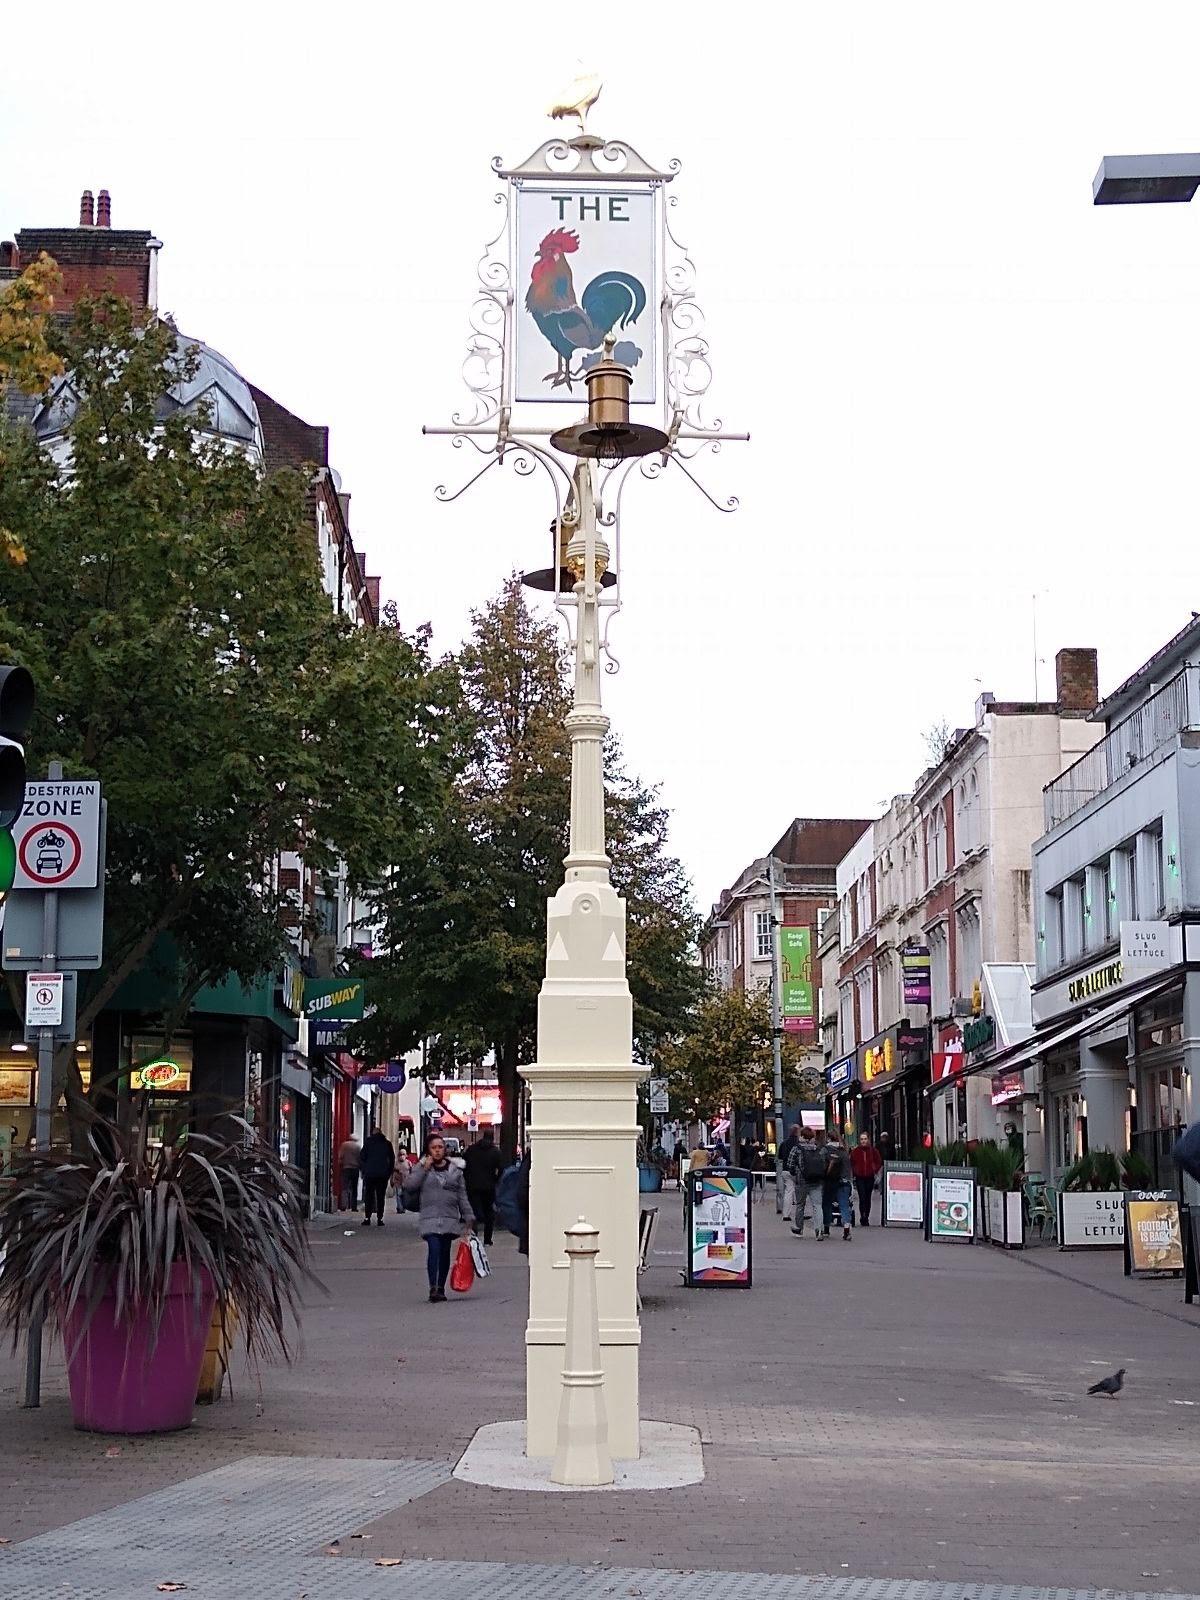 Sutton's refurbished crossroads lamppost looks as good as new after an extensive refurbishment project between Sutton Council, Historic England and Calibre Conservation